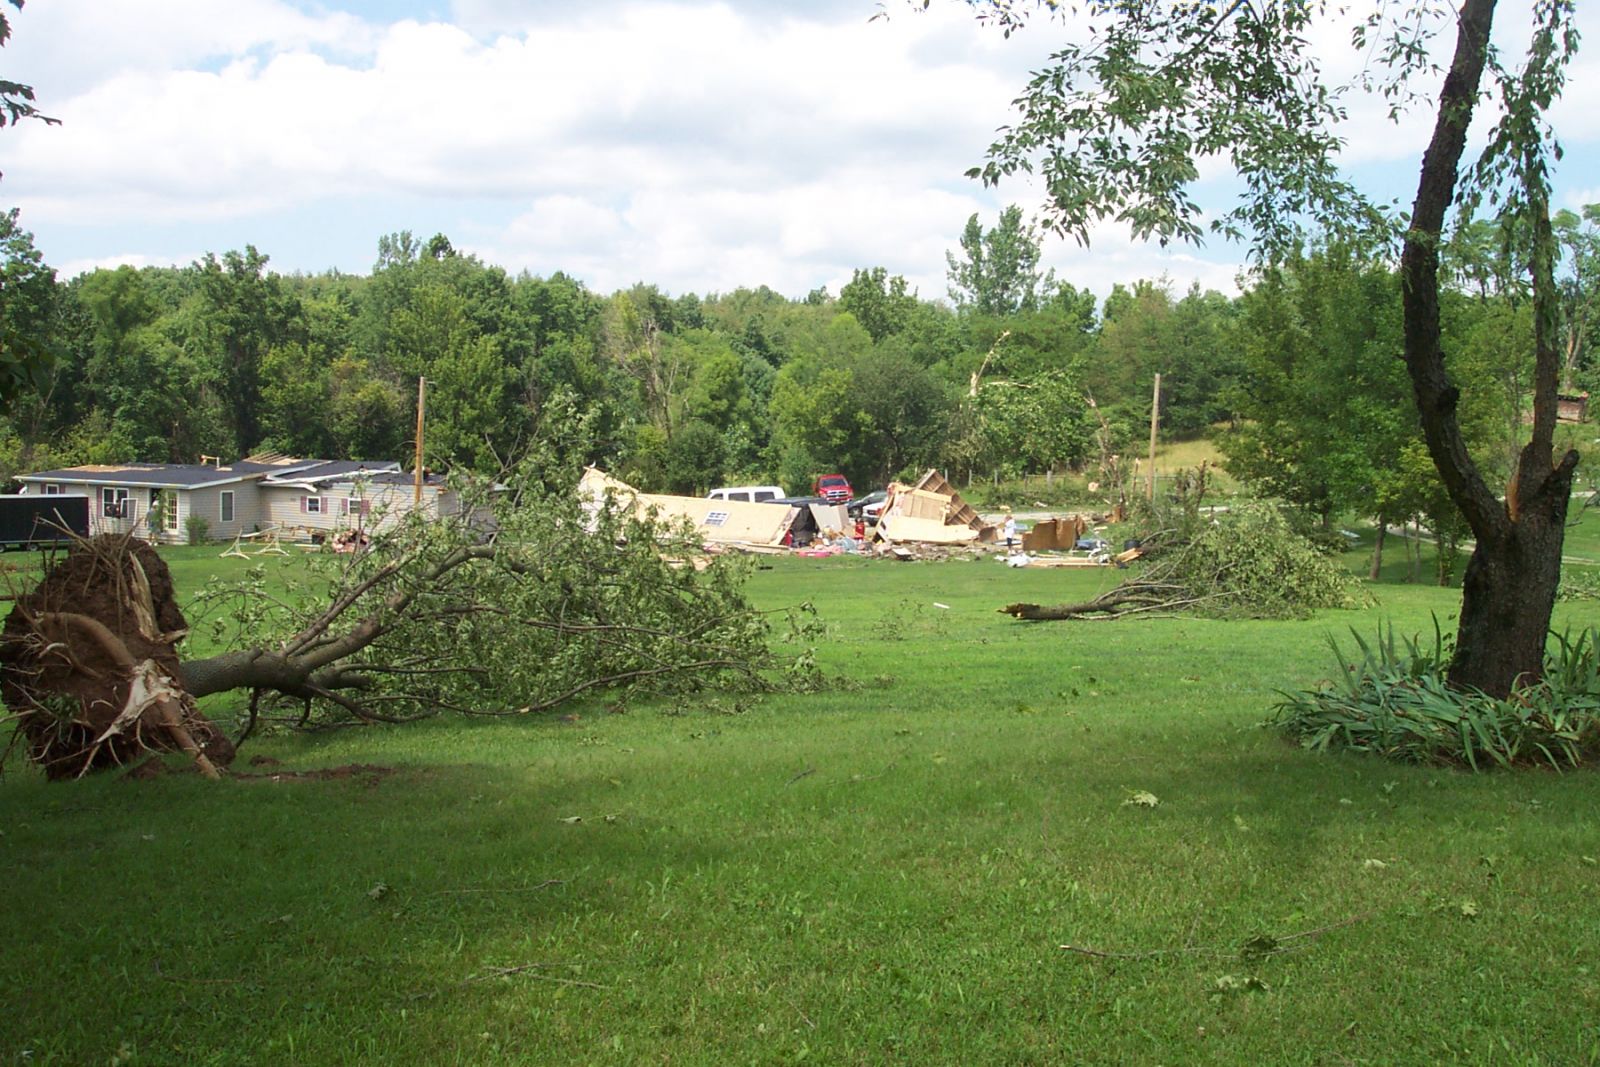 In this photo the tornado path is near the debris in the distance. The tornado passed from left to right. The tree limb in the foreground was carried inward toward the tornado path, with the drag marks visible on the ground.